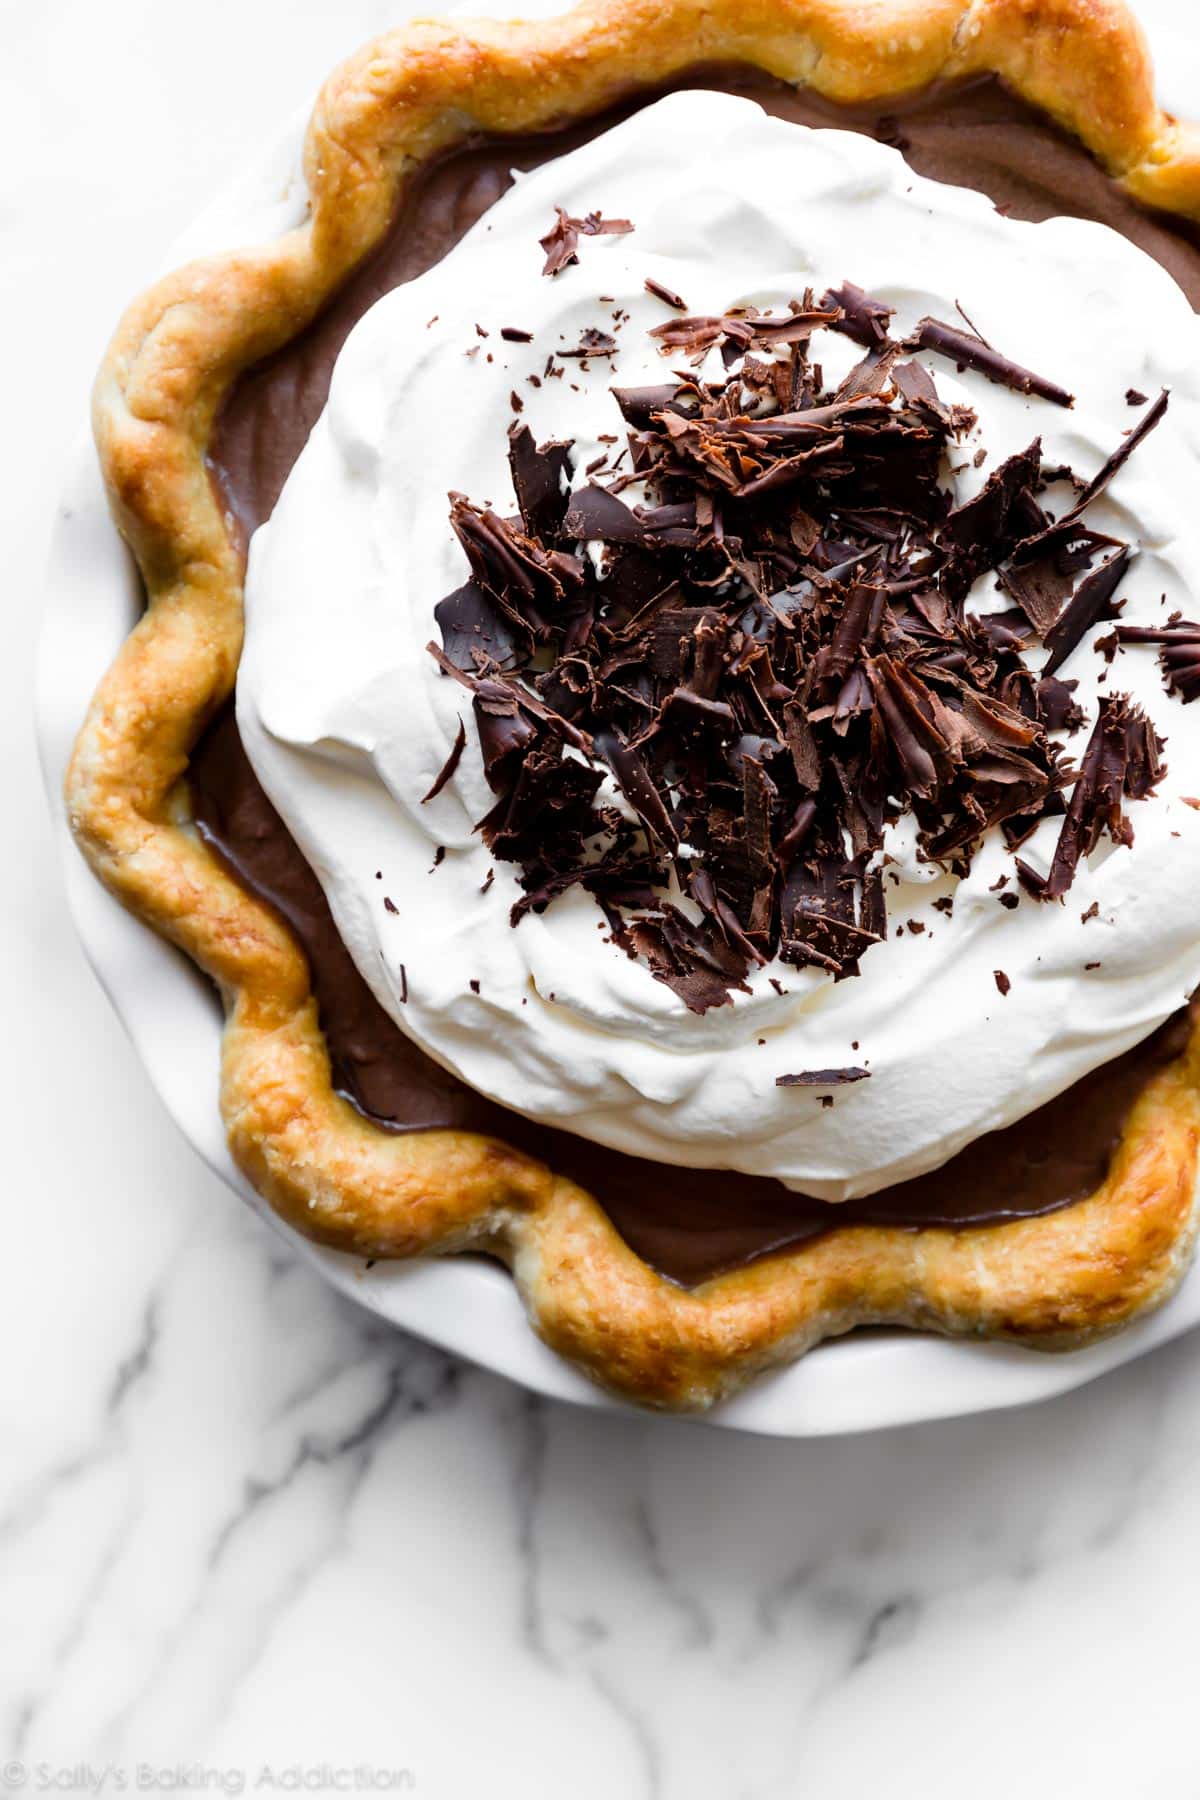 french silk pie with whipped cream and chocolate shavings